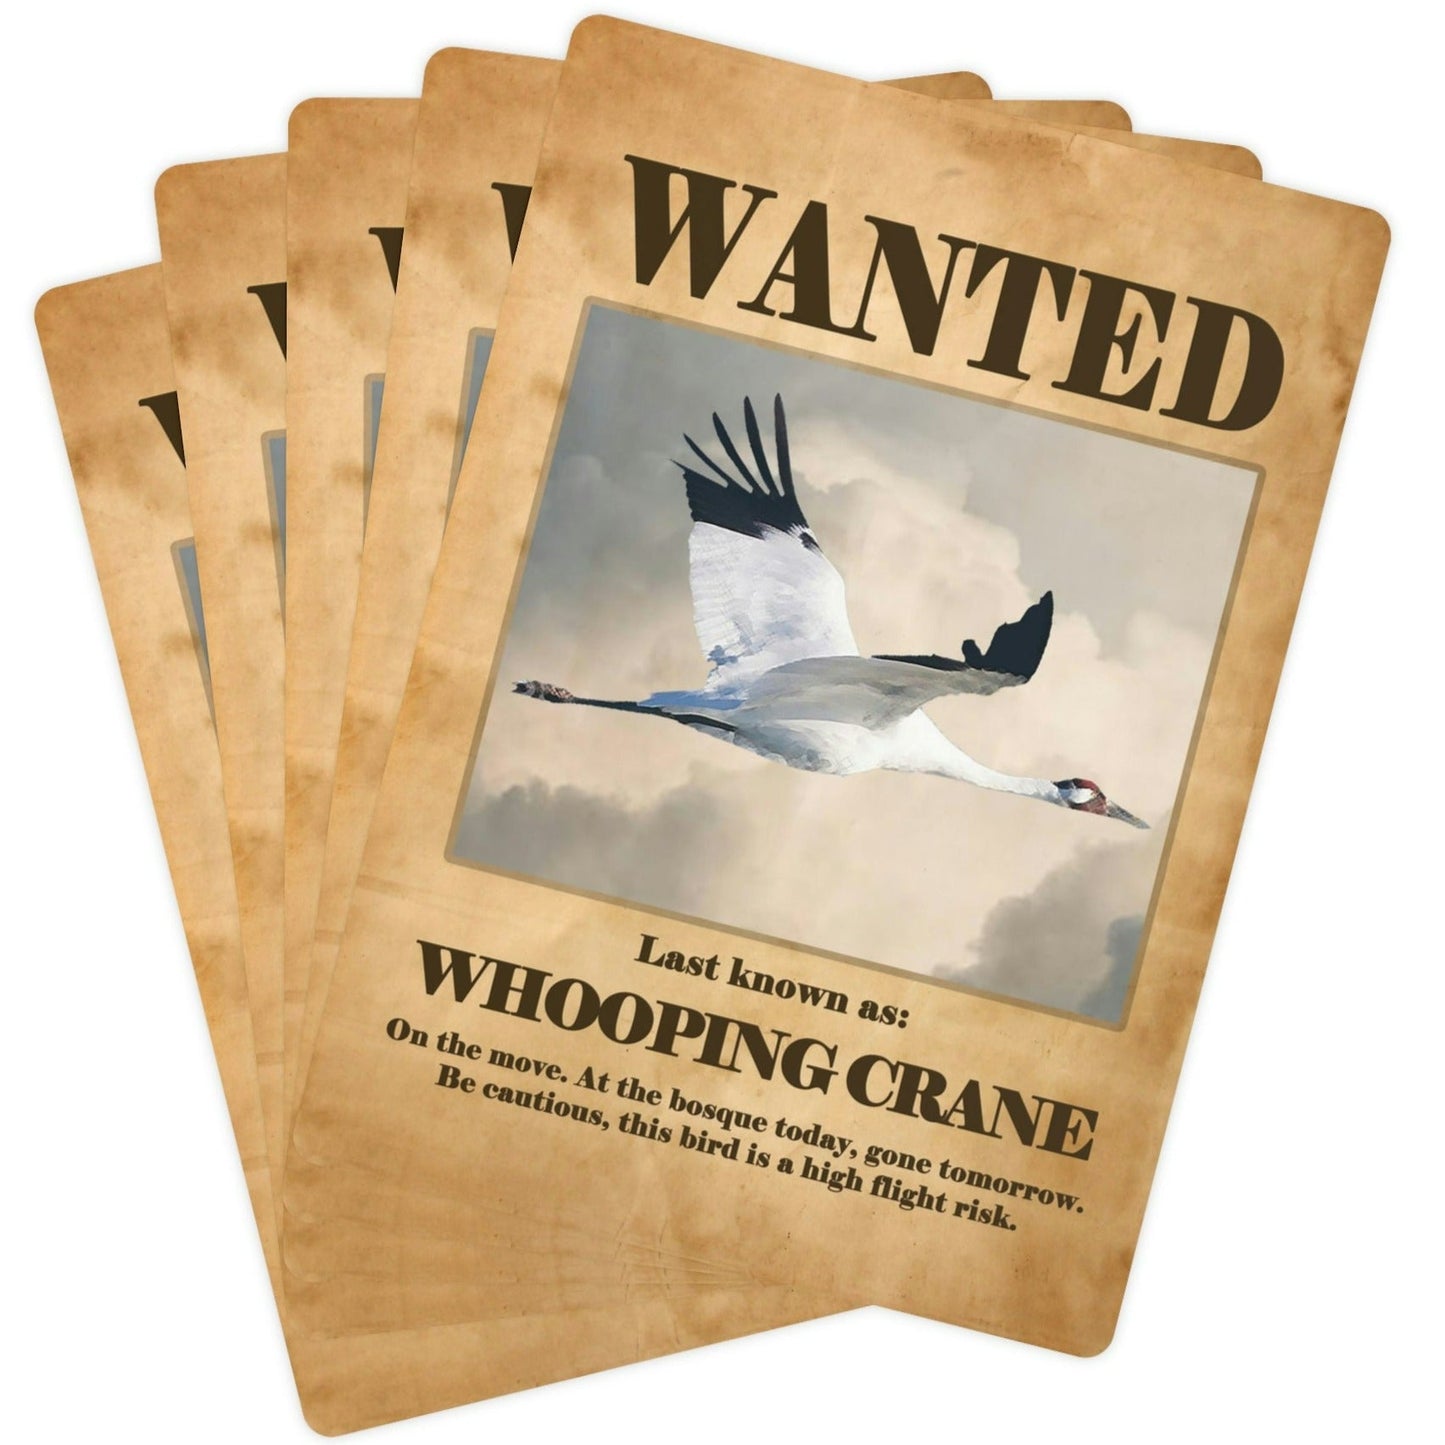 Wanted: Whooping Crane Poker Playing Cards